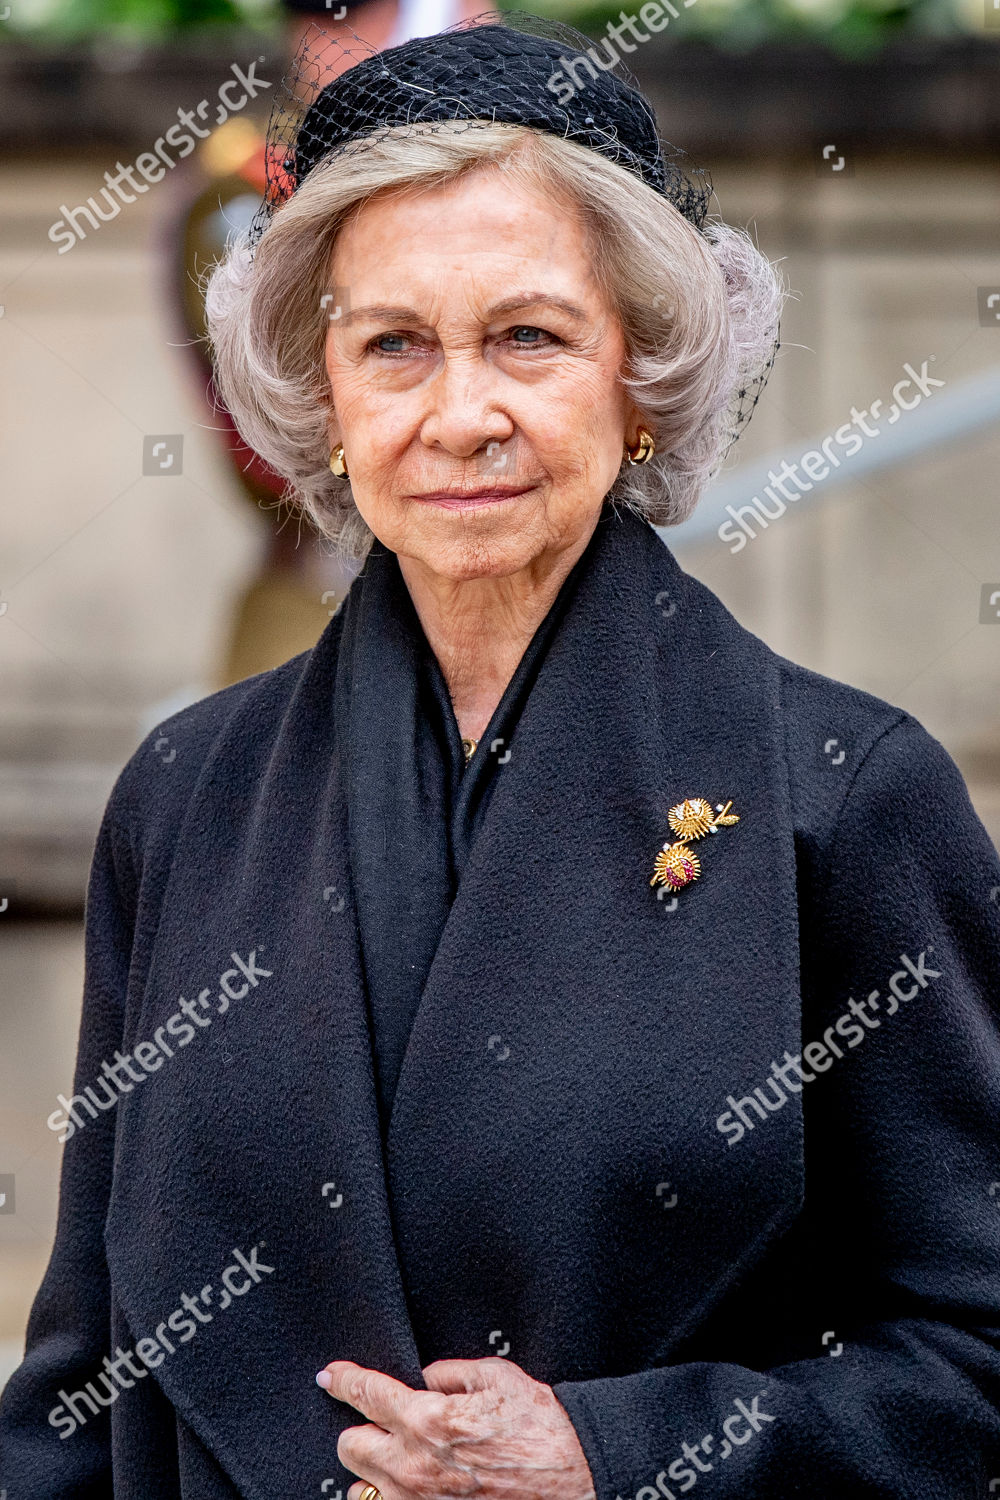 grand-duke-jean-funeral-cathedral-notre-dame-luxembourg-shutterstock-editorial-10228100fm.jpg